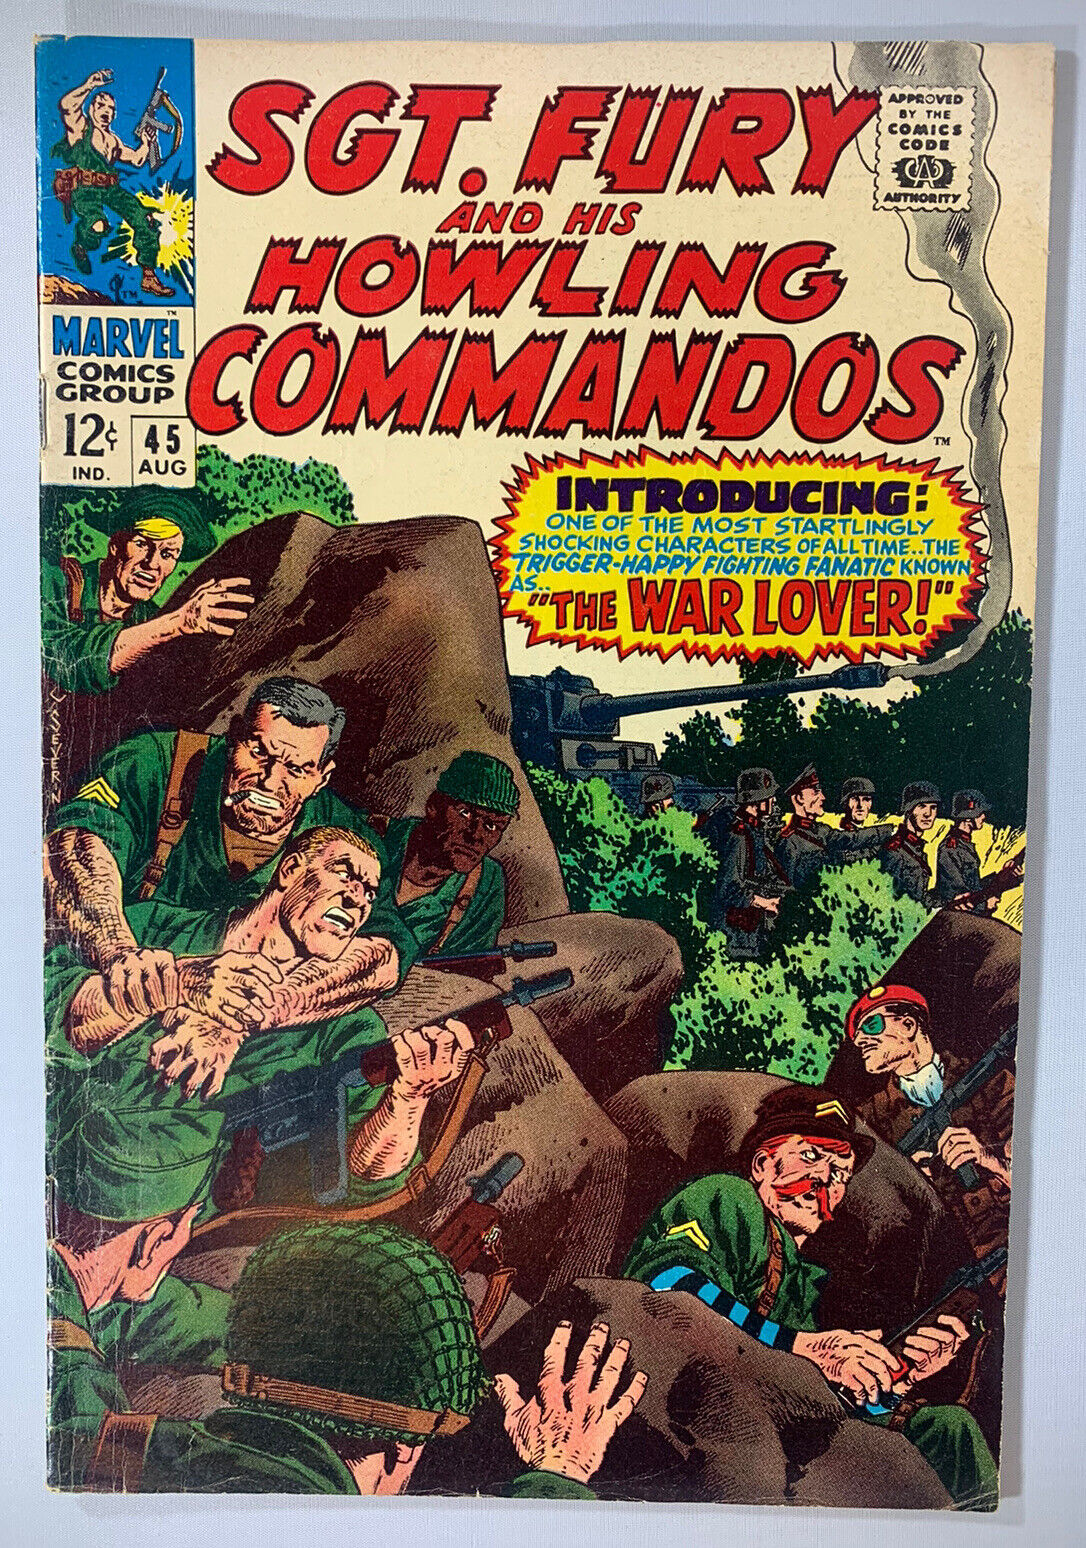 Sgt. Fury and His Howling Commandos #45 (1967) in 5.0 Very Good/Fine